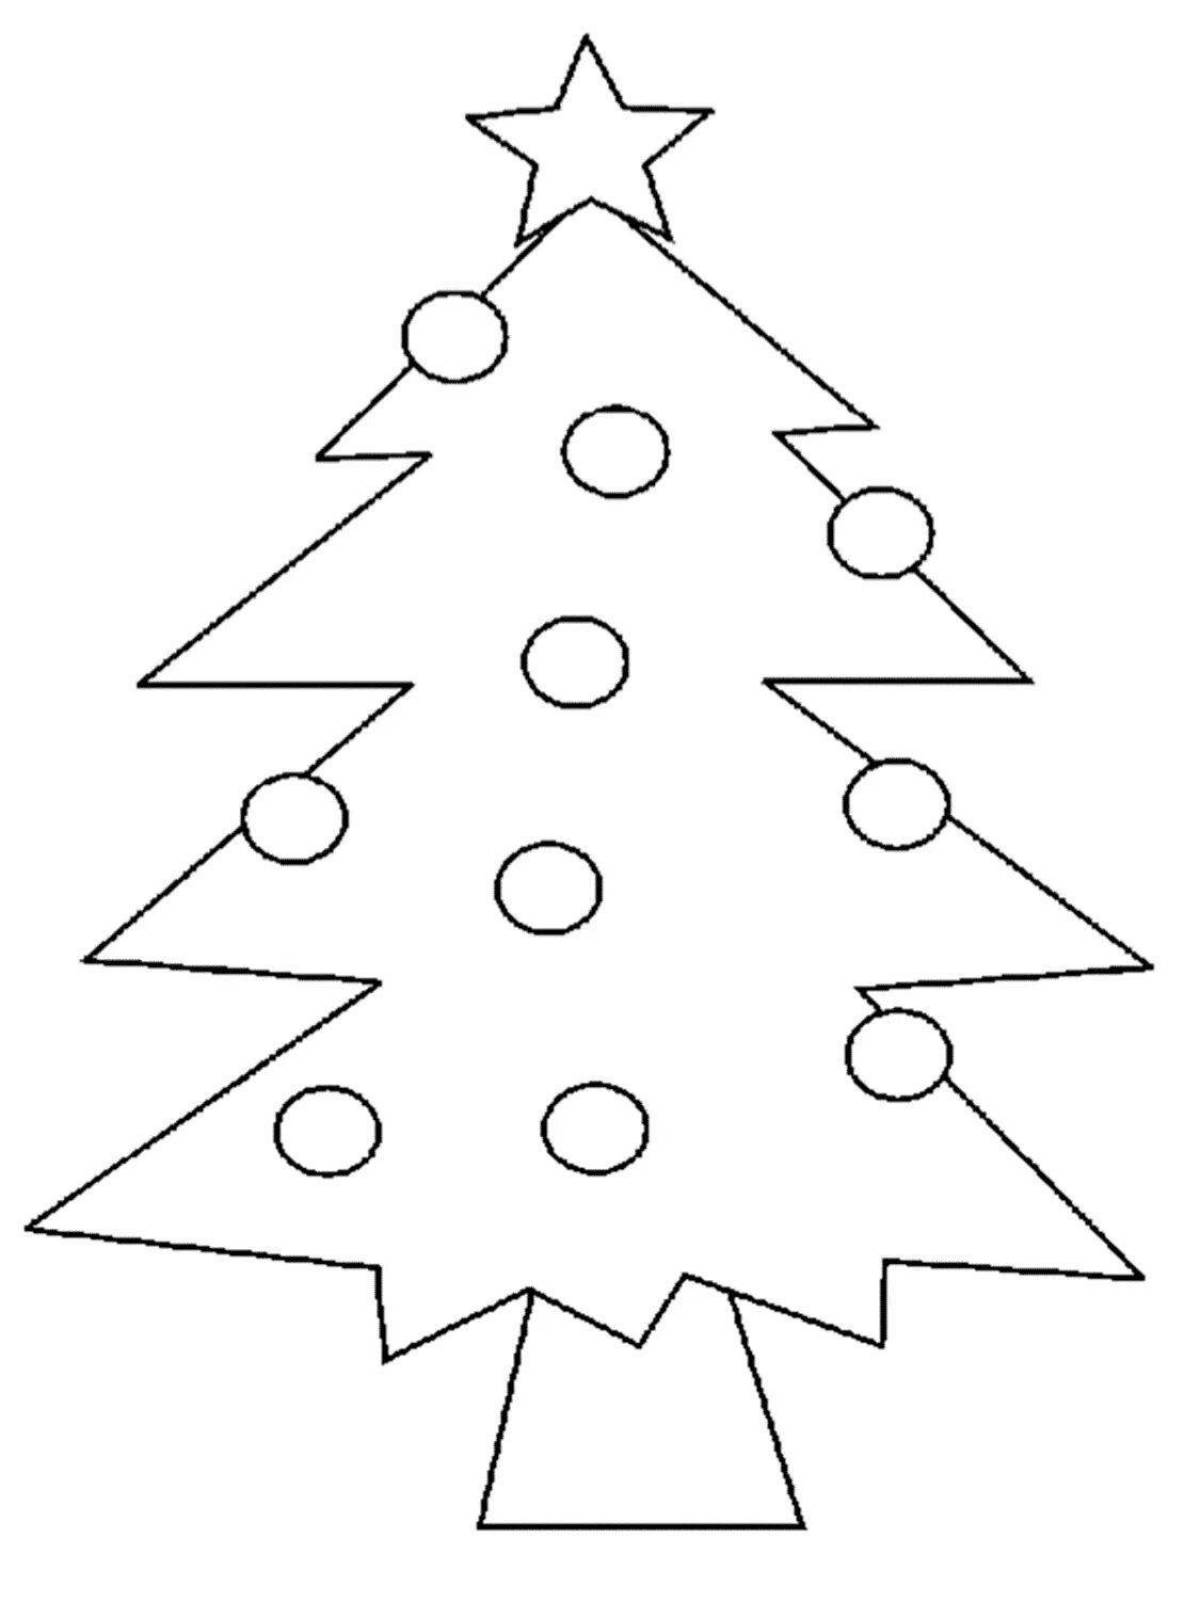 Coloring for a joyful Christmas tree for children